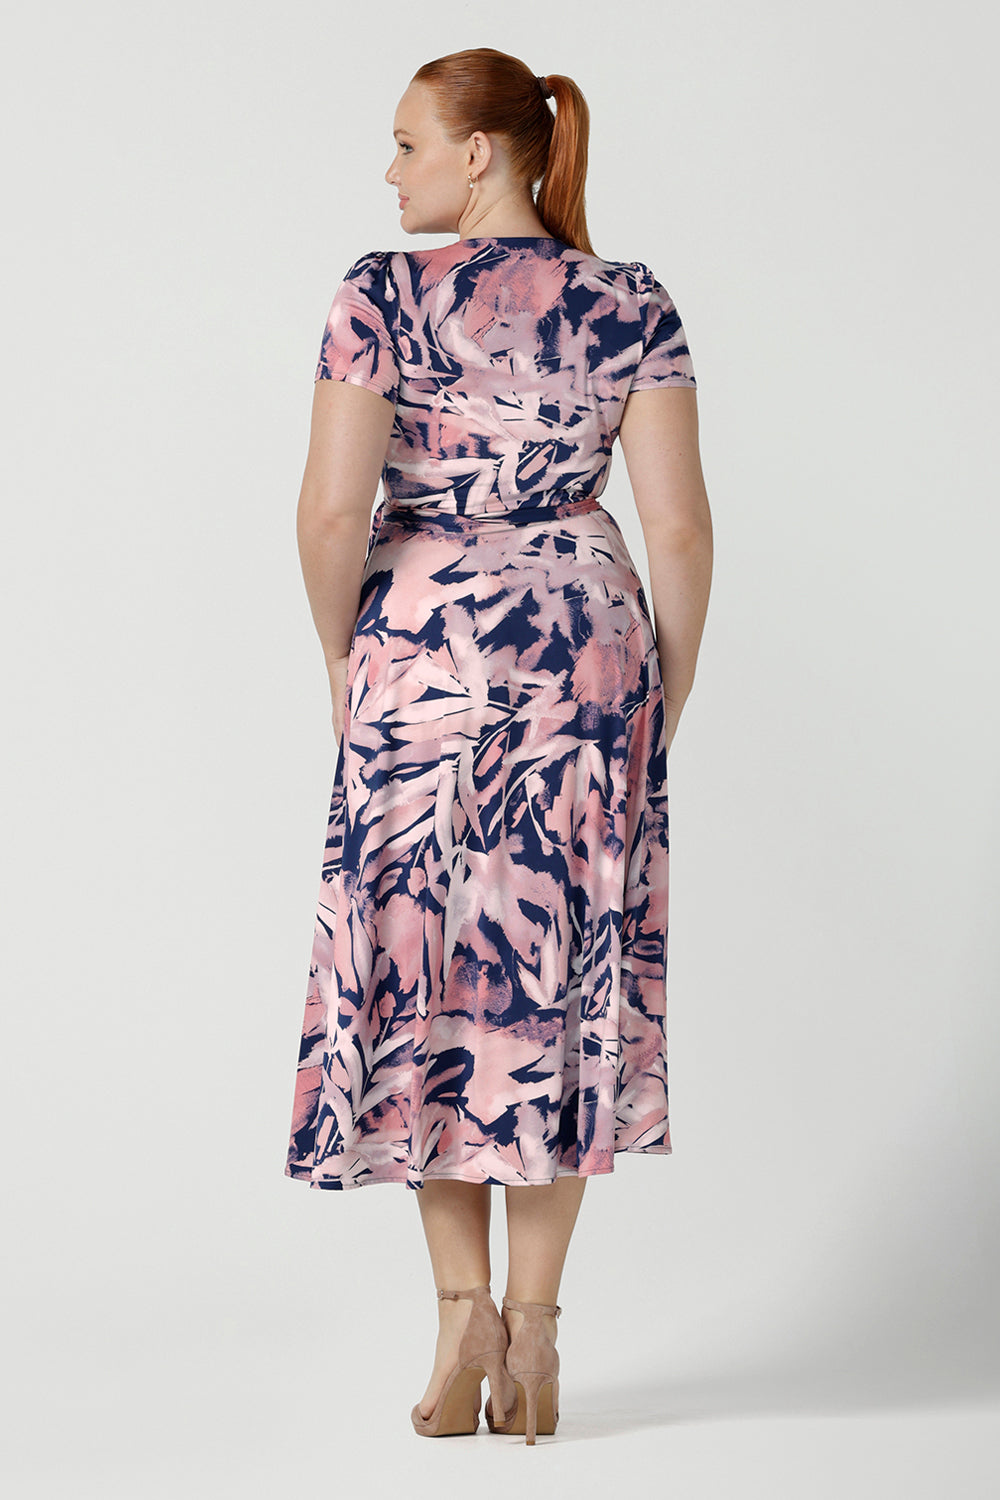 Back view of a size 12 woman wearing the Alexis dress a functioning wrap dress with short sleeve and midi length. Great for work to weekend wear. Made in Australia for women size 8 - 24.